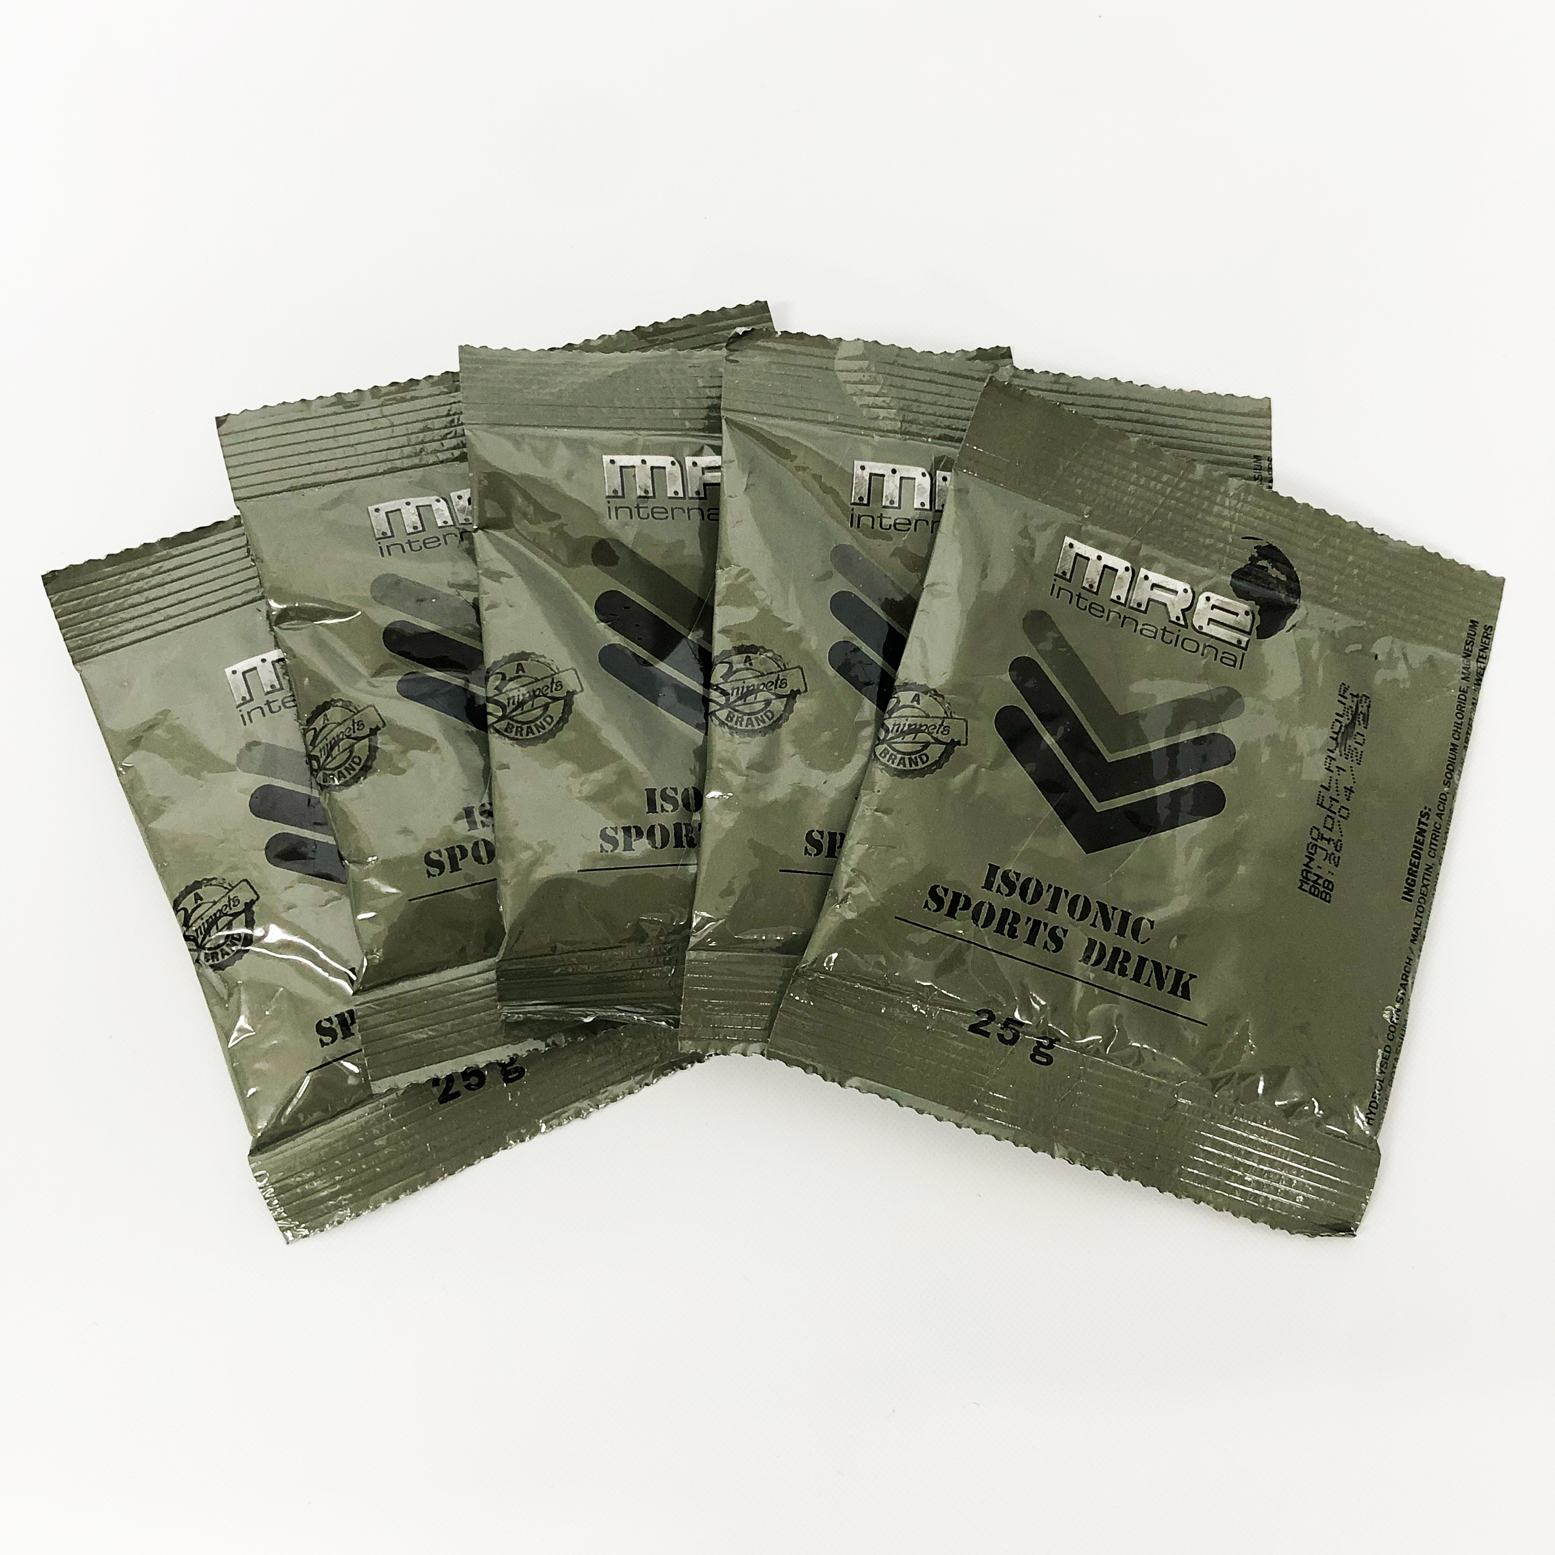 MRE Isotonic Sports Drink ration pack meals ready to eat